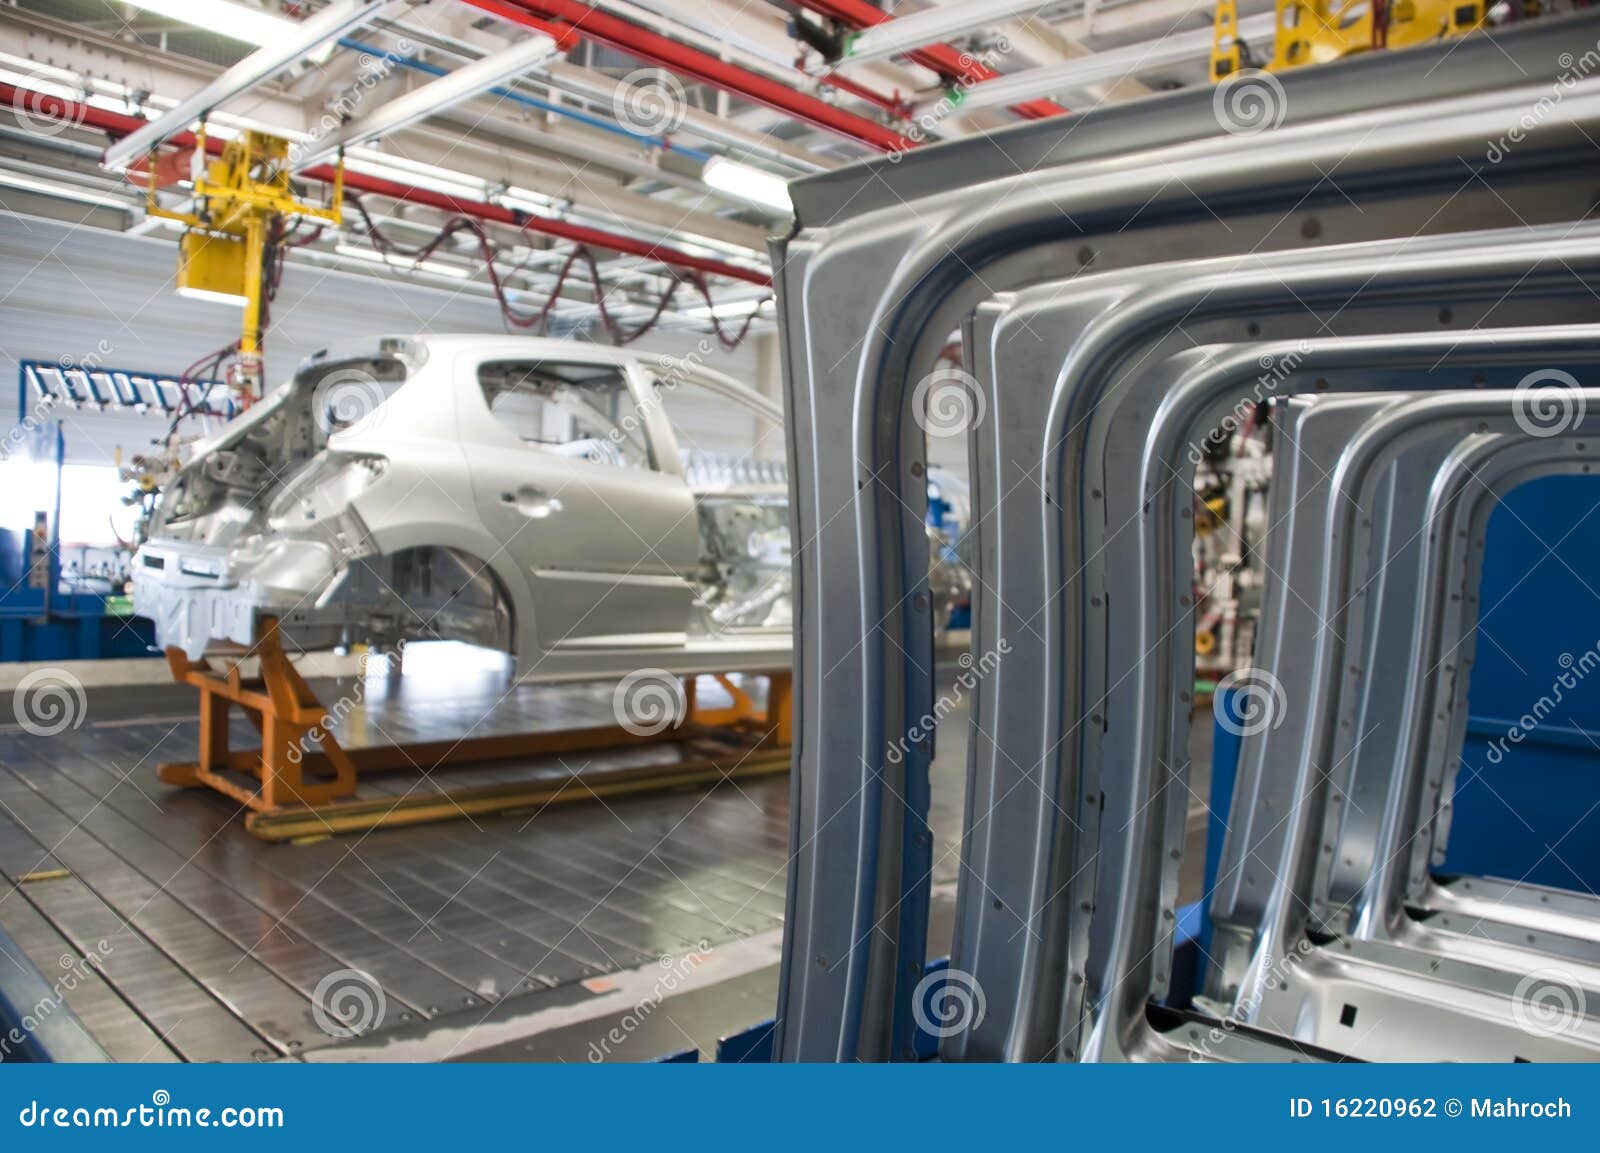 automotive industry manufacture